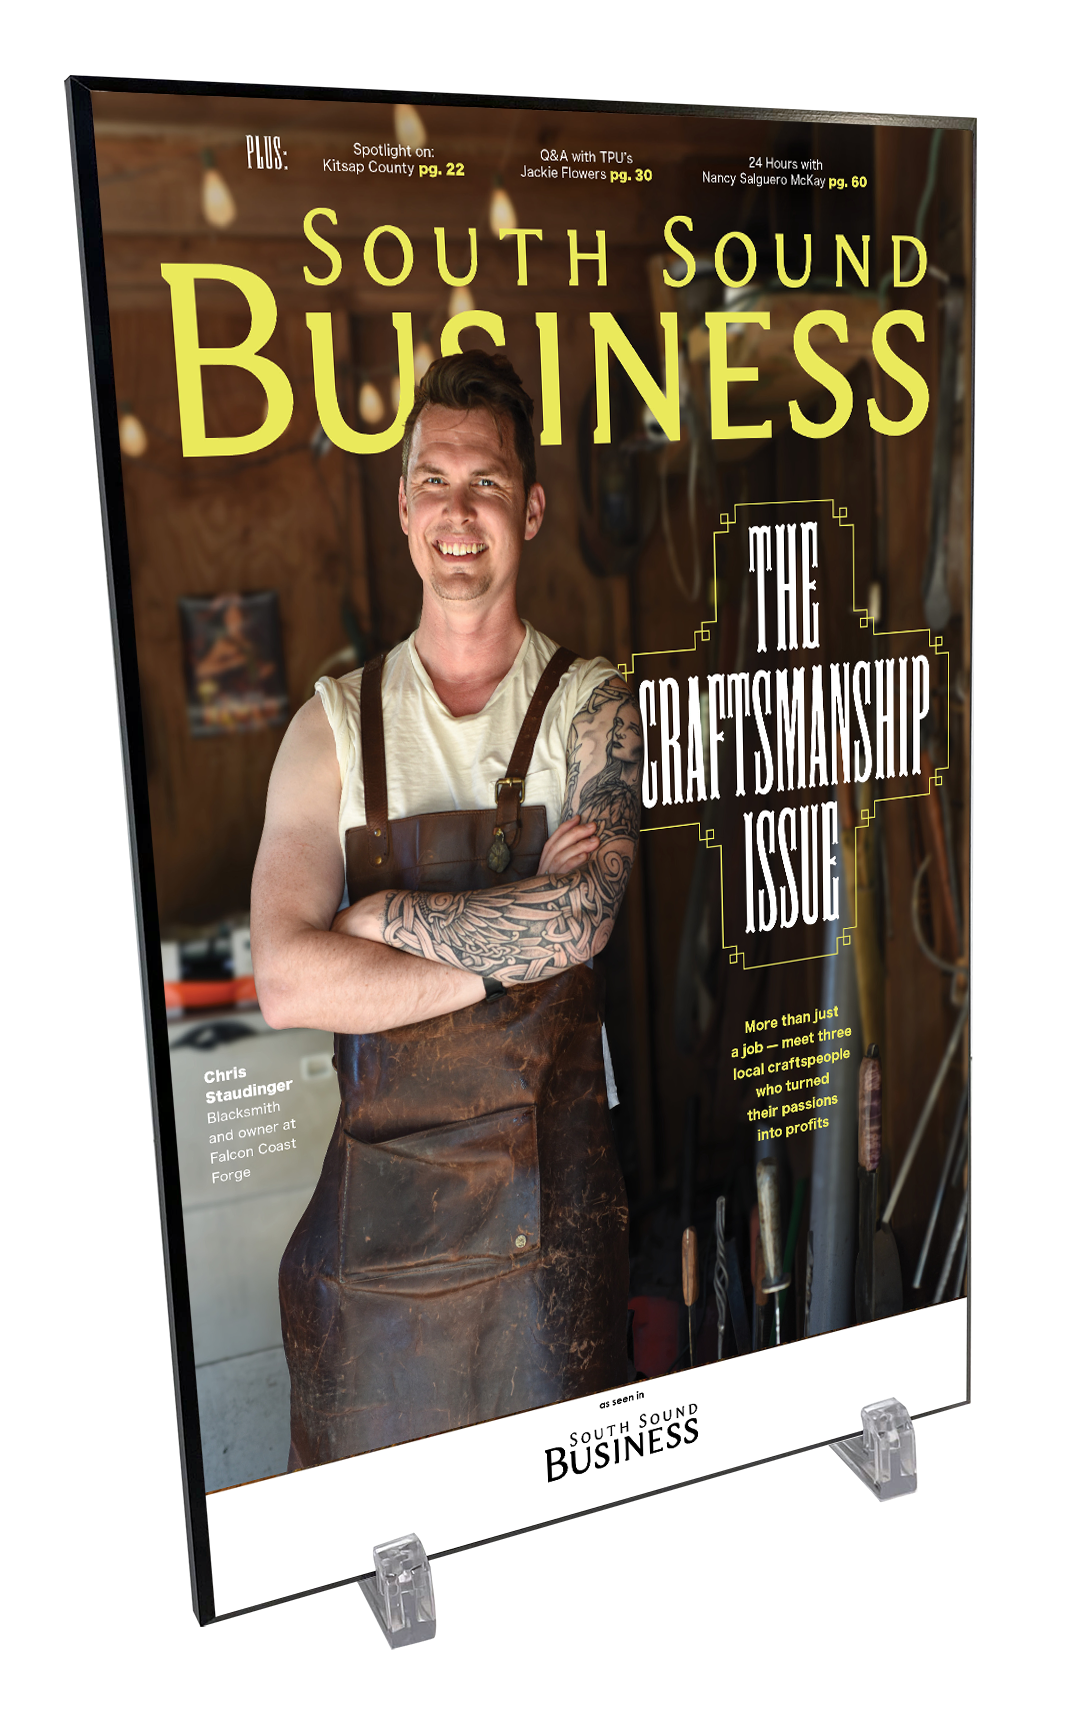 South Sound Business Magazine Article & Cover Plaques